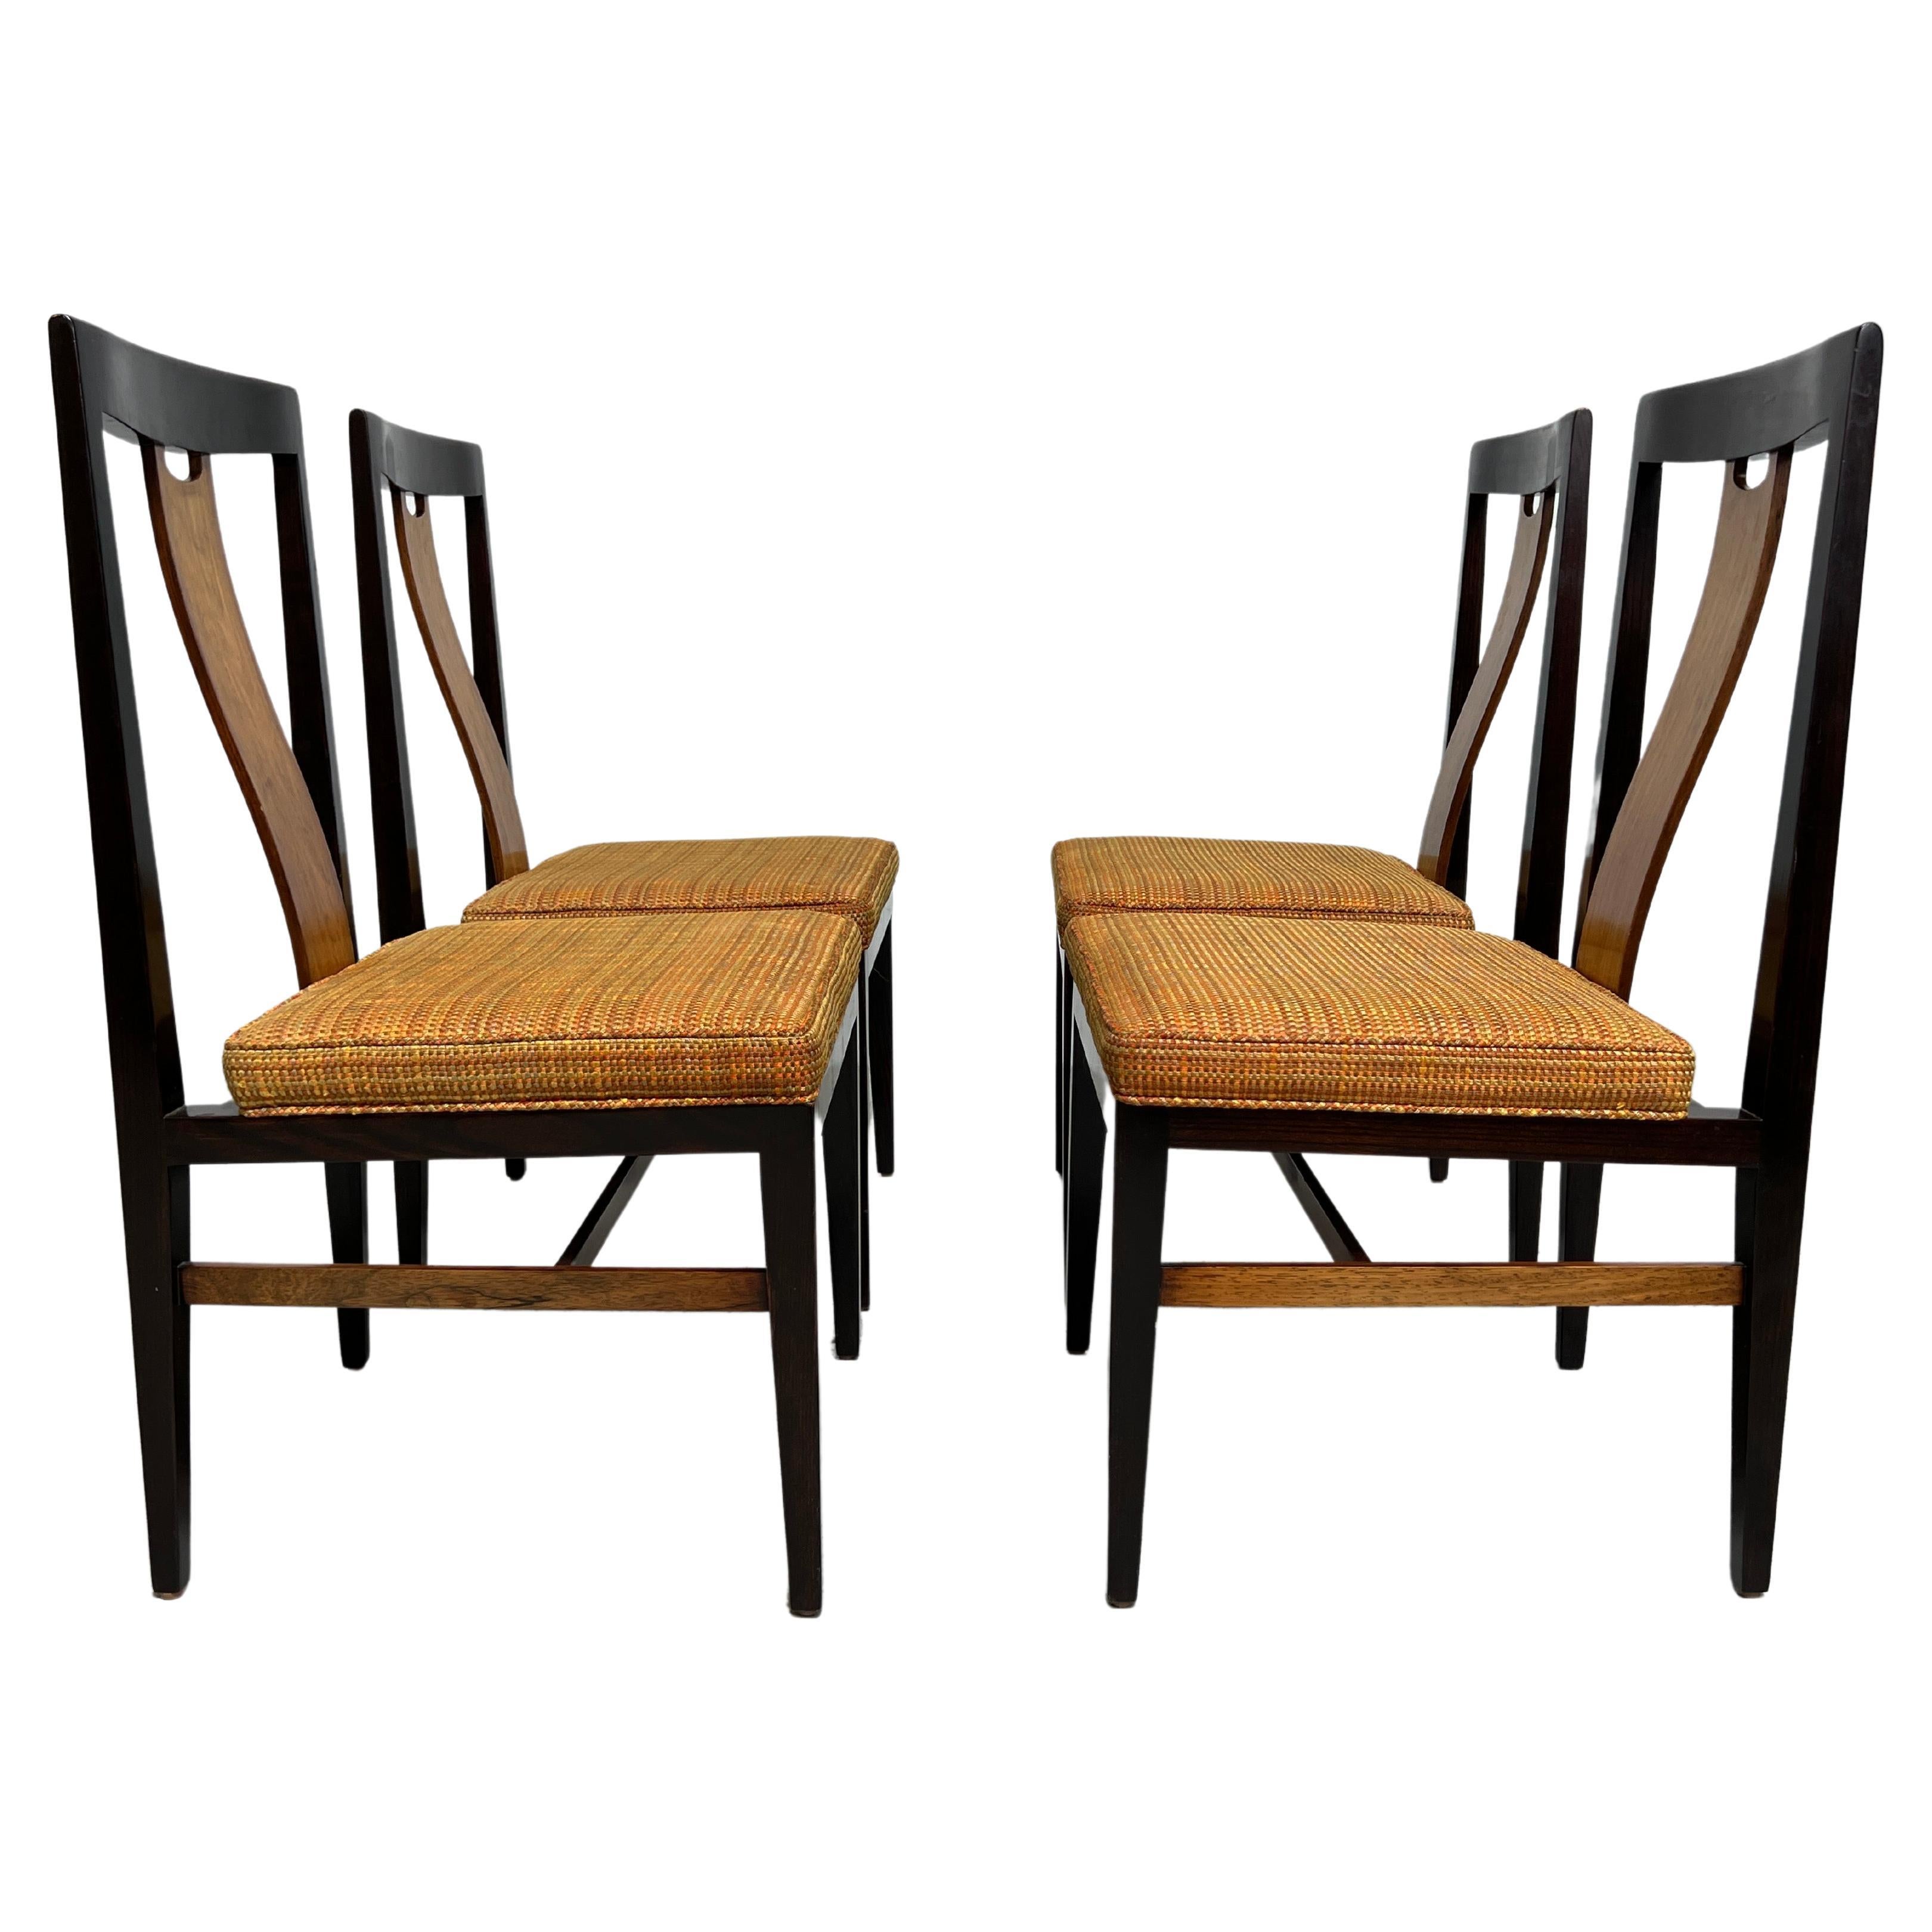 Set of Four Dining Chairs by Edward Wormley for Dunbar 